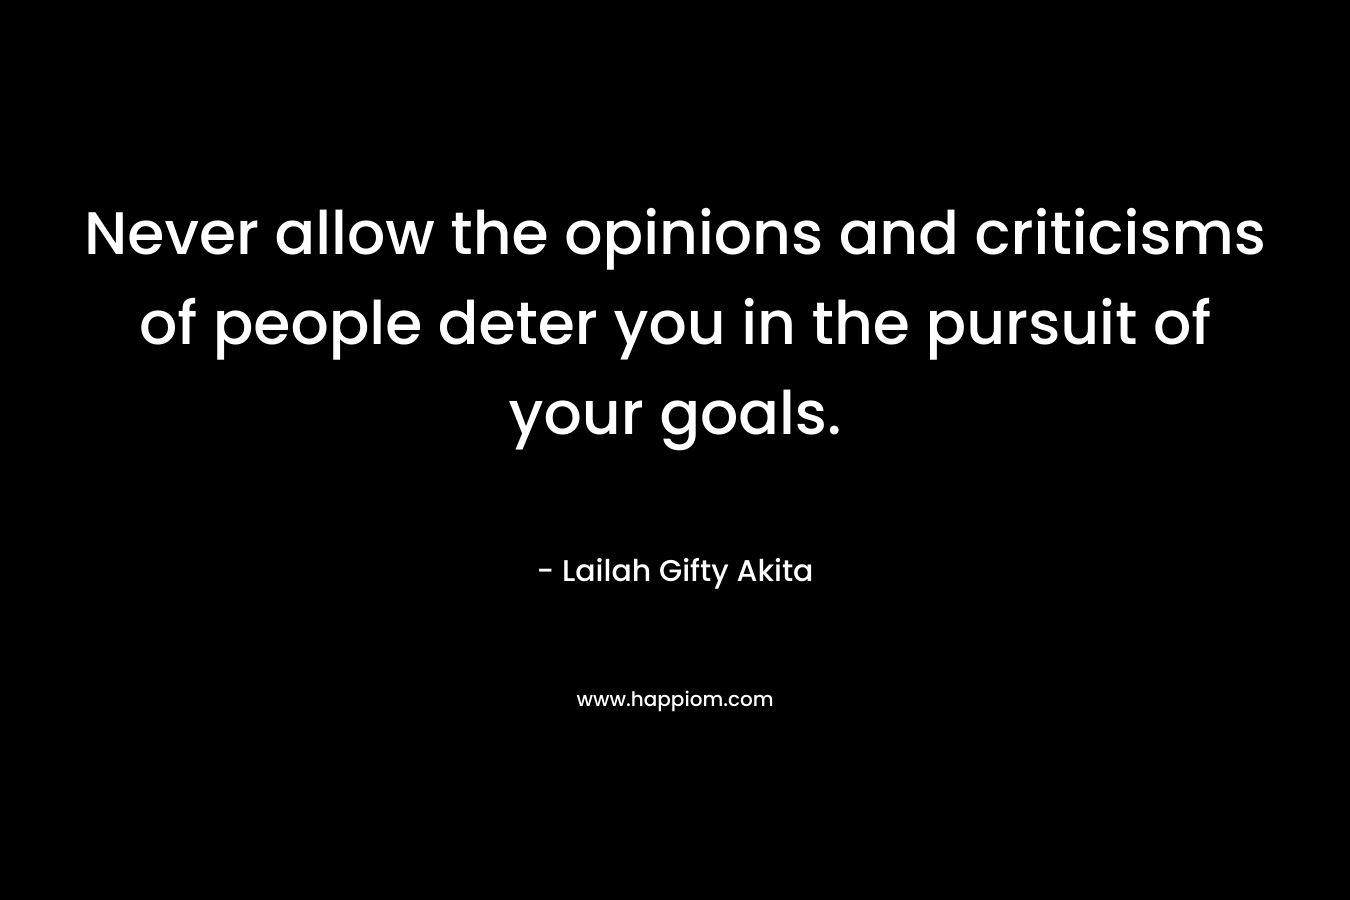 Never allow the opinions and criticisms of people deter you in the pursuit of your goals.